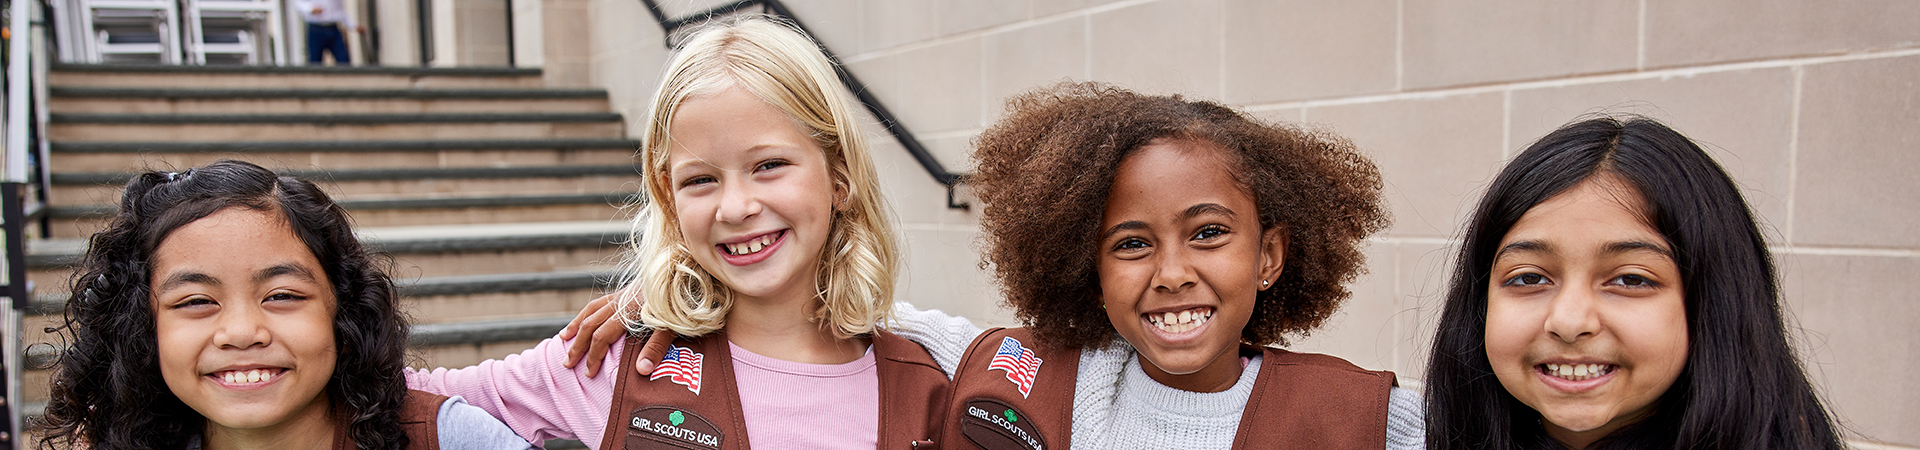  Brownie Girl Scouts smiling 